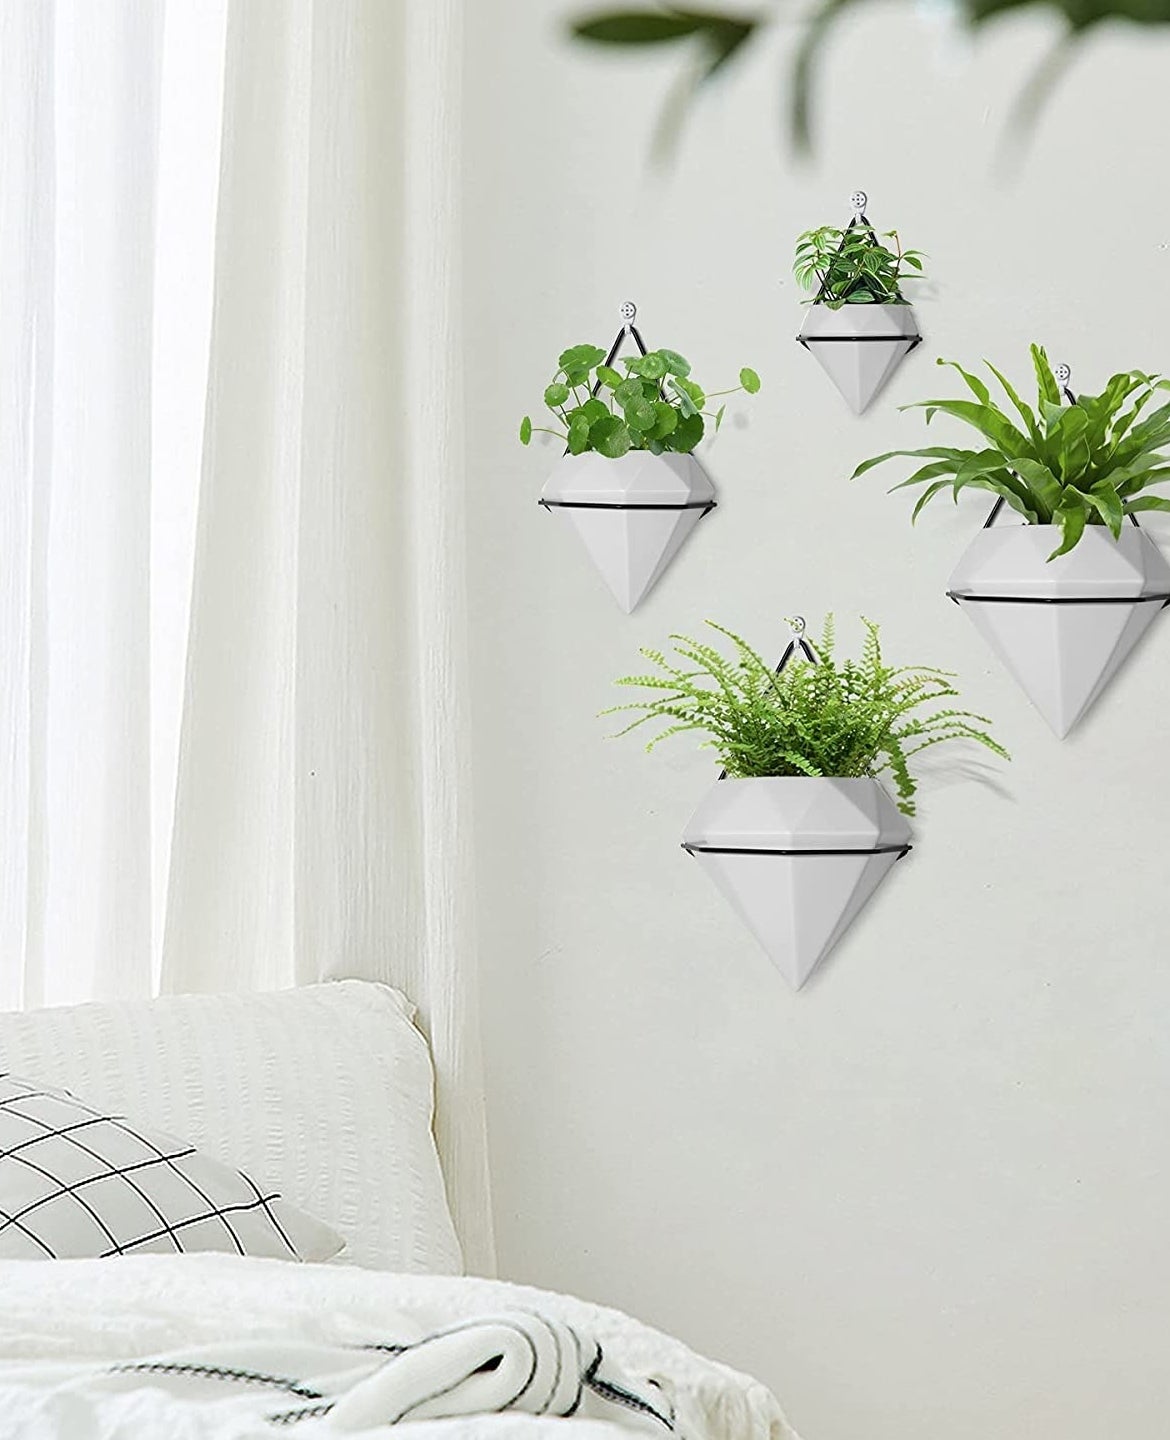 A set of four planters hanging on a bedroom wall with plants in them.